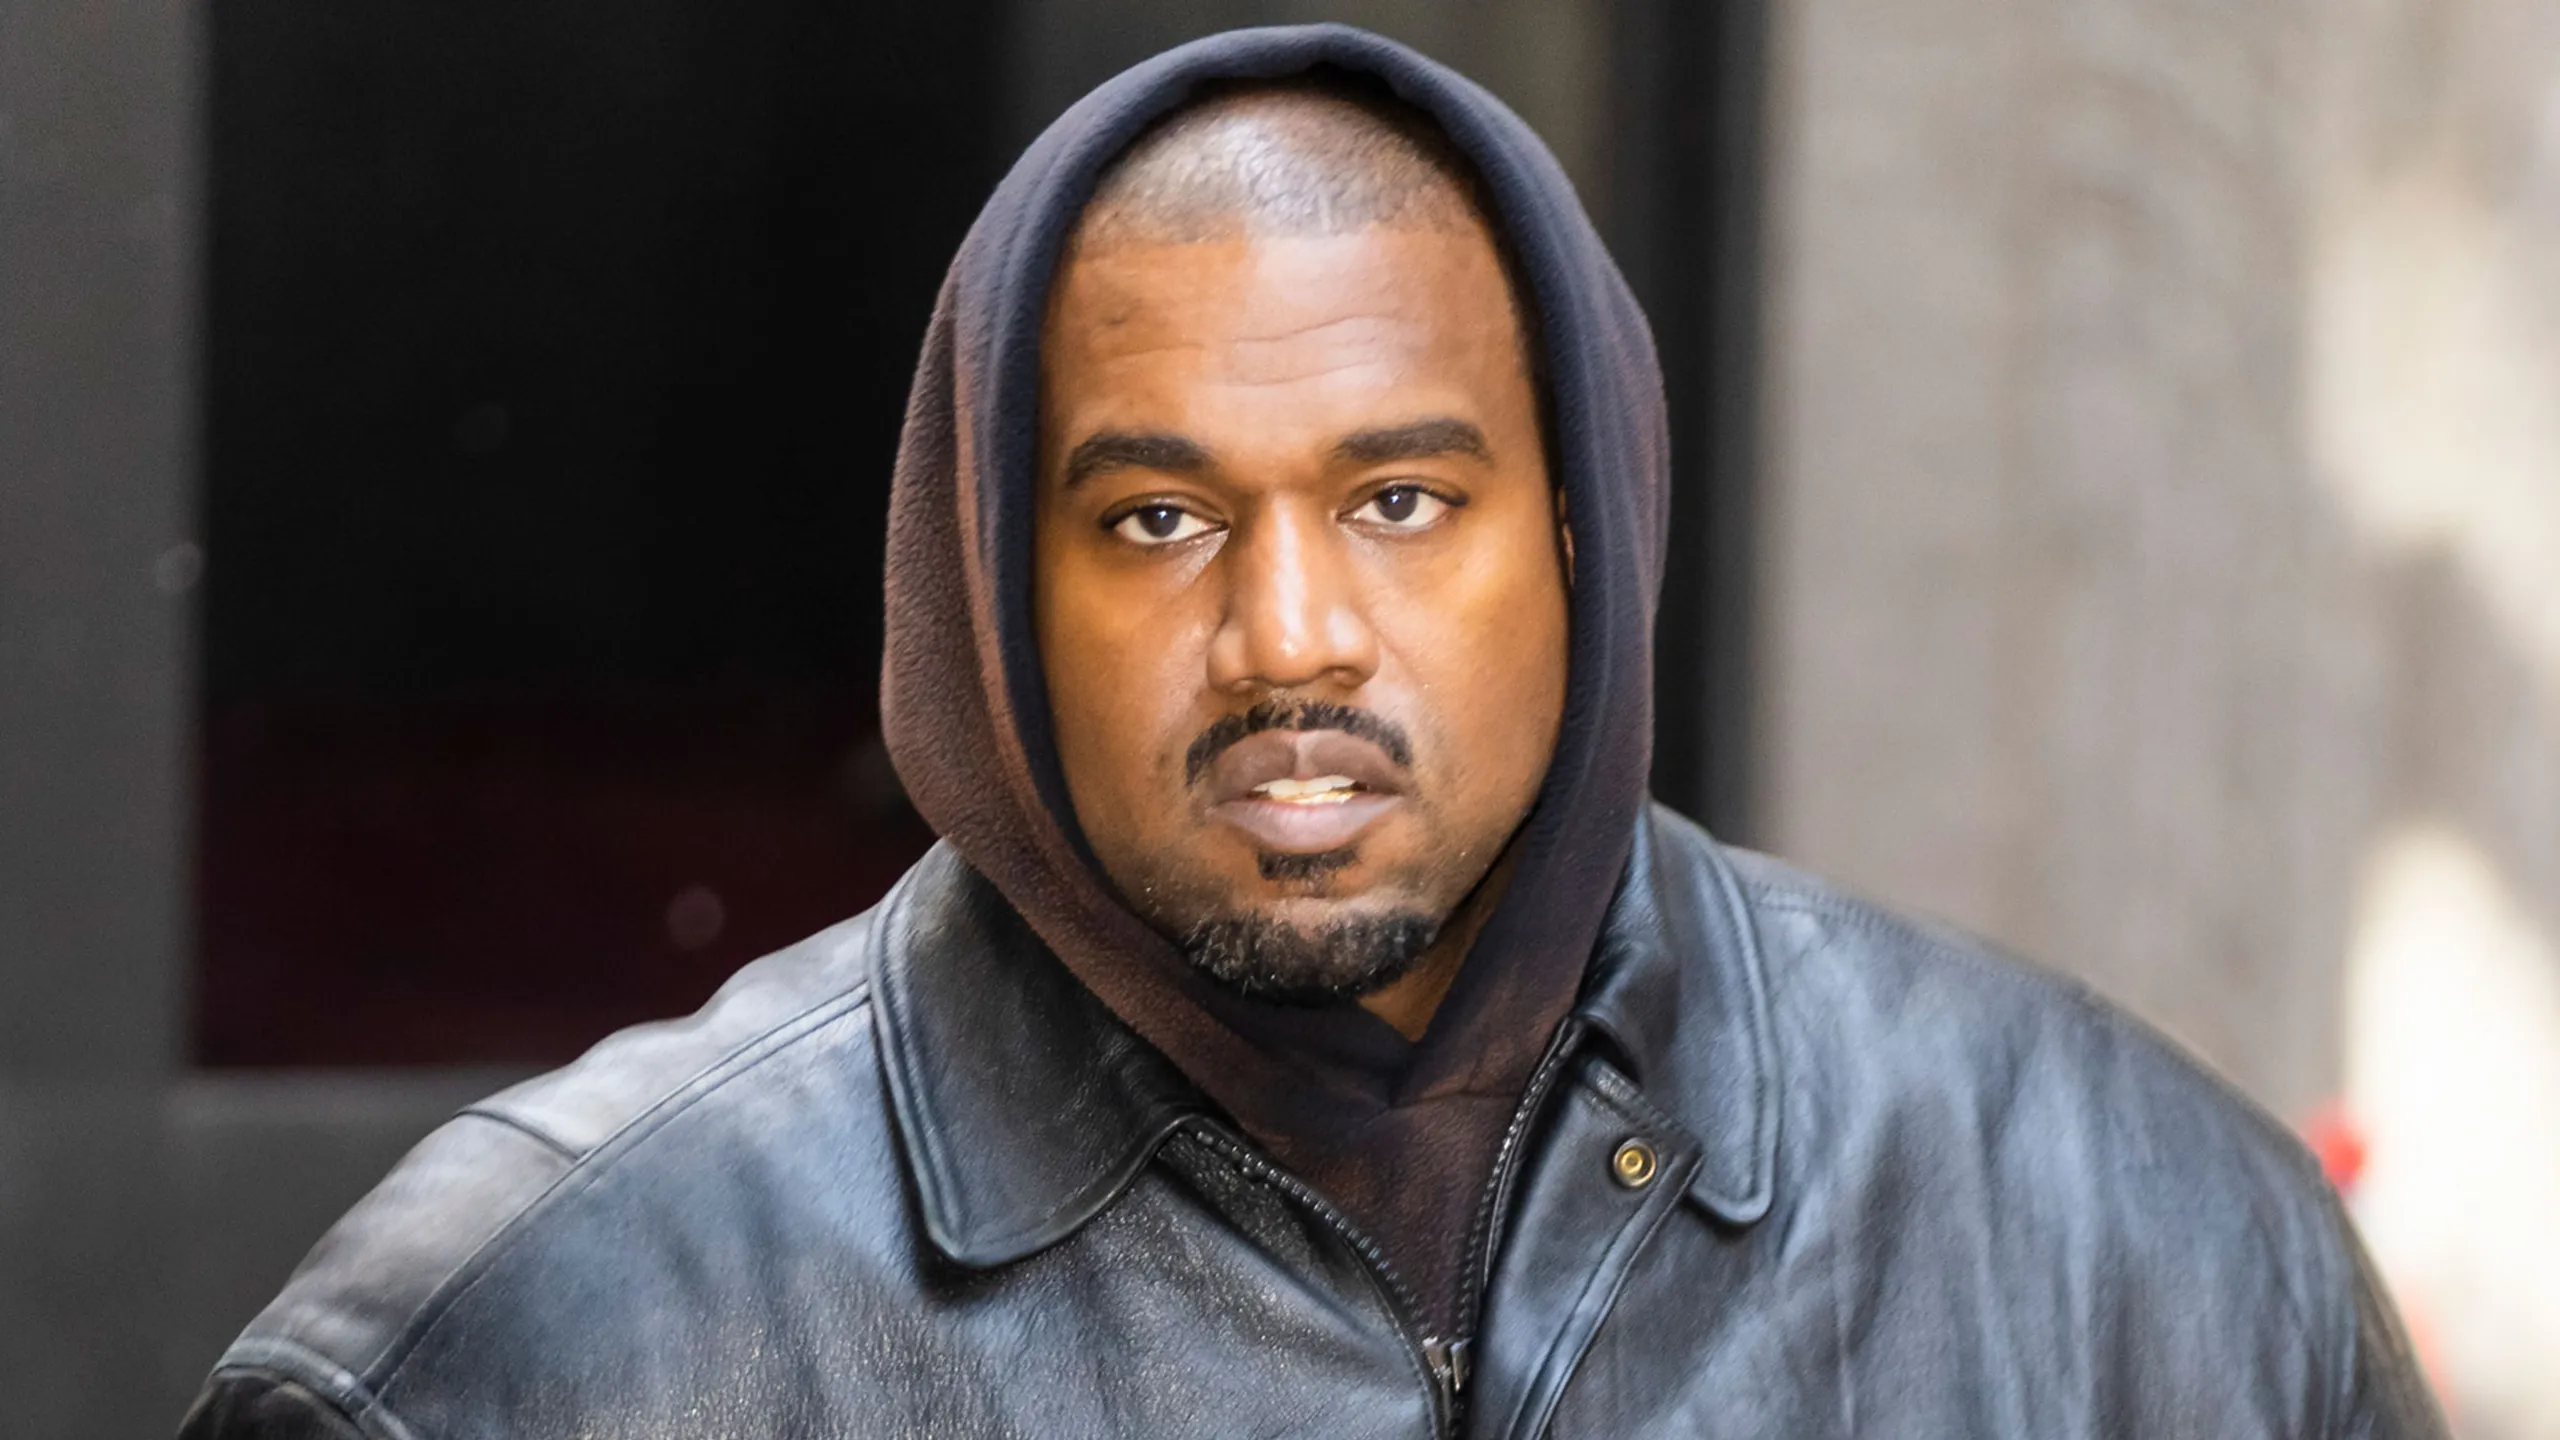 Kayne West 'Ye' dethroned as 'billionaire' escorted out of Skechers office